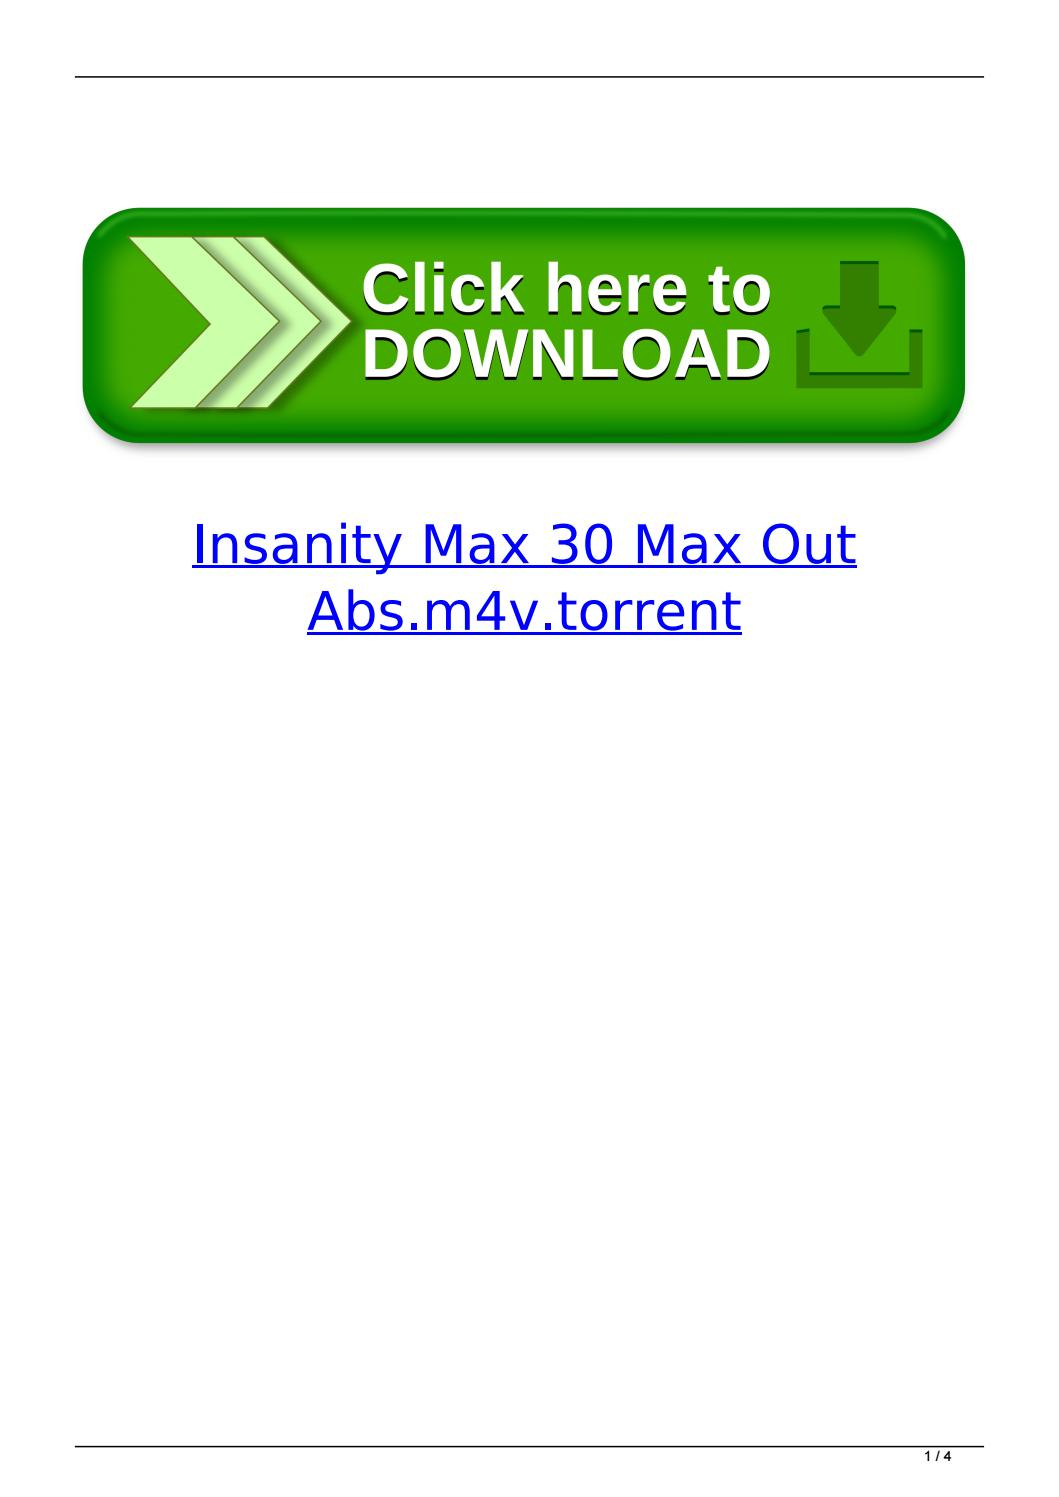 Insanity Max 30 Max Out Abs.m4V.torrent By Dacenunla  Issuu inside Insanity Max 30 Pdf